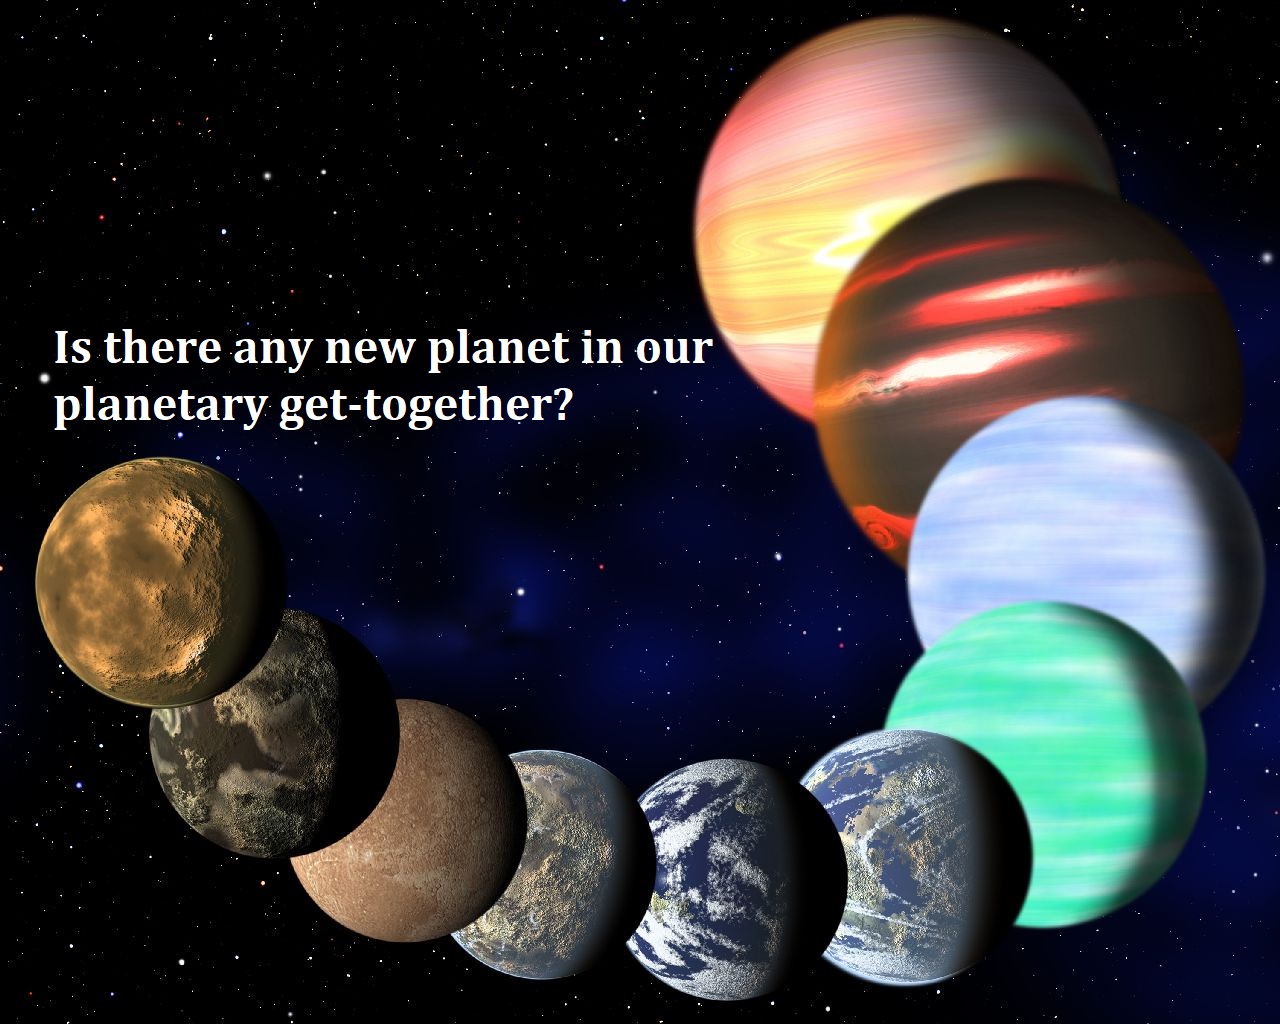 Is there any new planet in our planetary get-together?